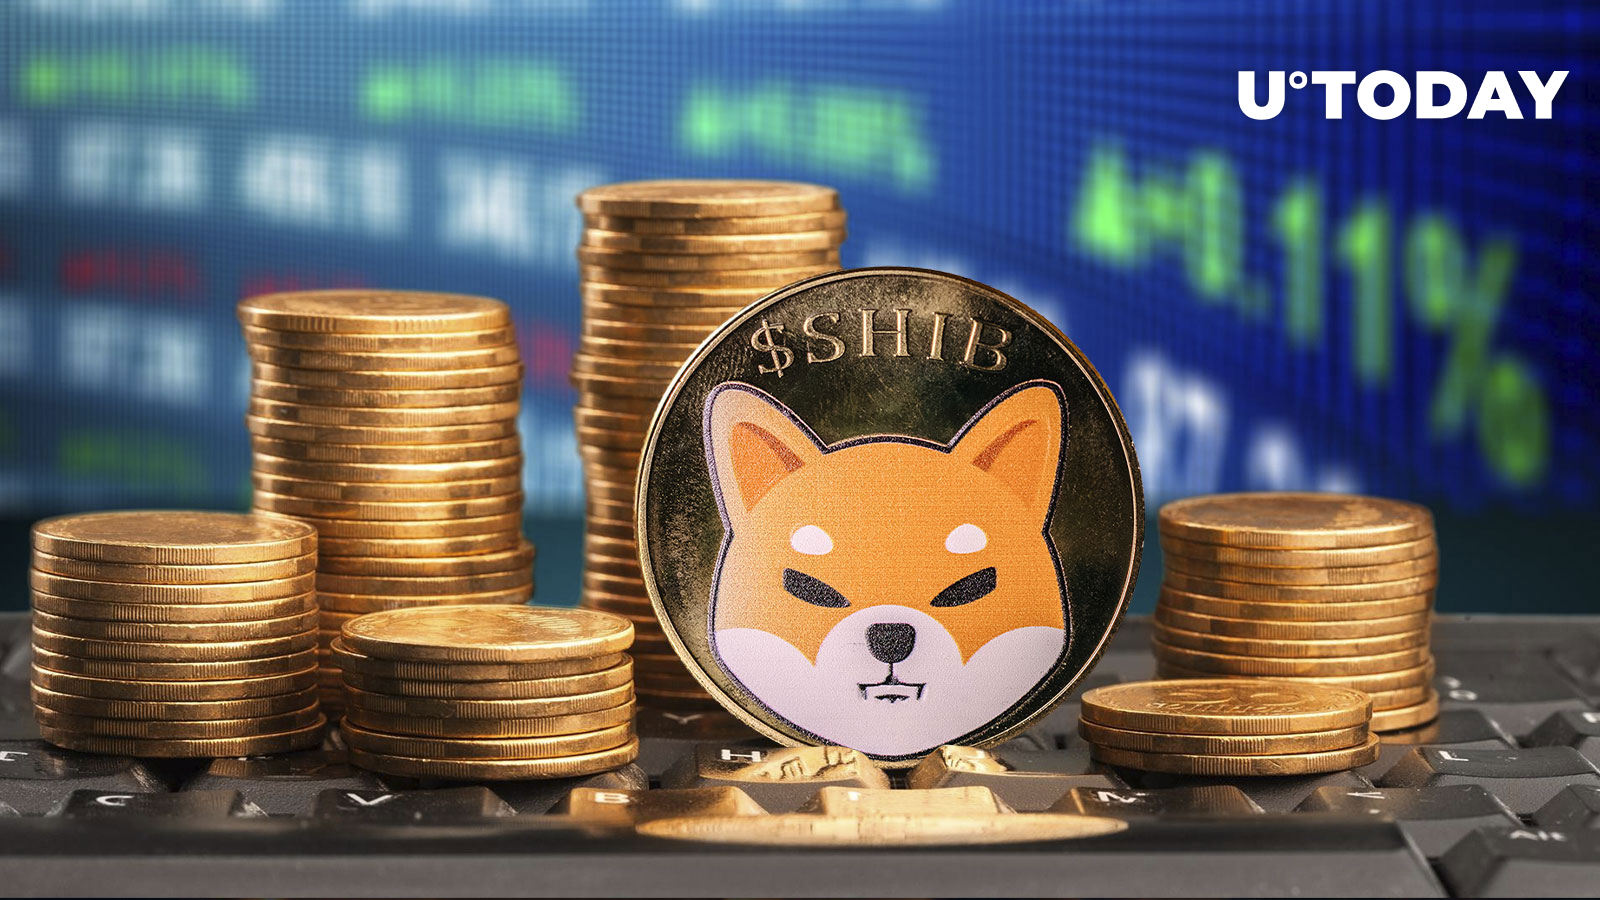 Shiba Inu (SHIB) Price Could Double If It Breaks This Barrier